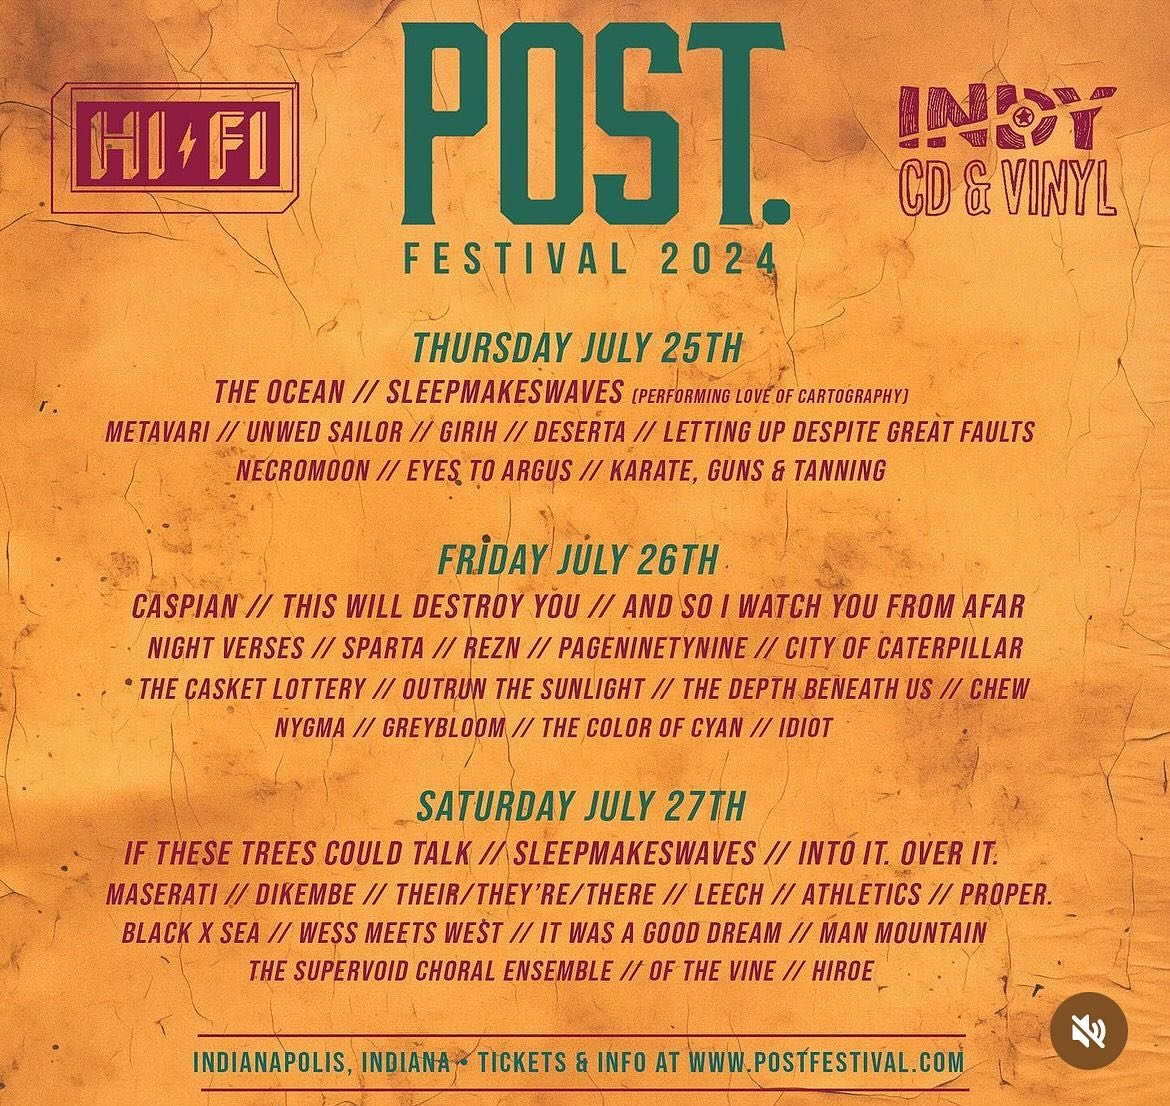 Daily tickets are now available for @the_post_festival . But we imagine it would be disappointing not to attend the entire festival. Lots of more exciting news to come.